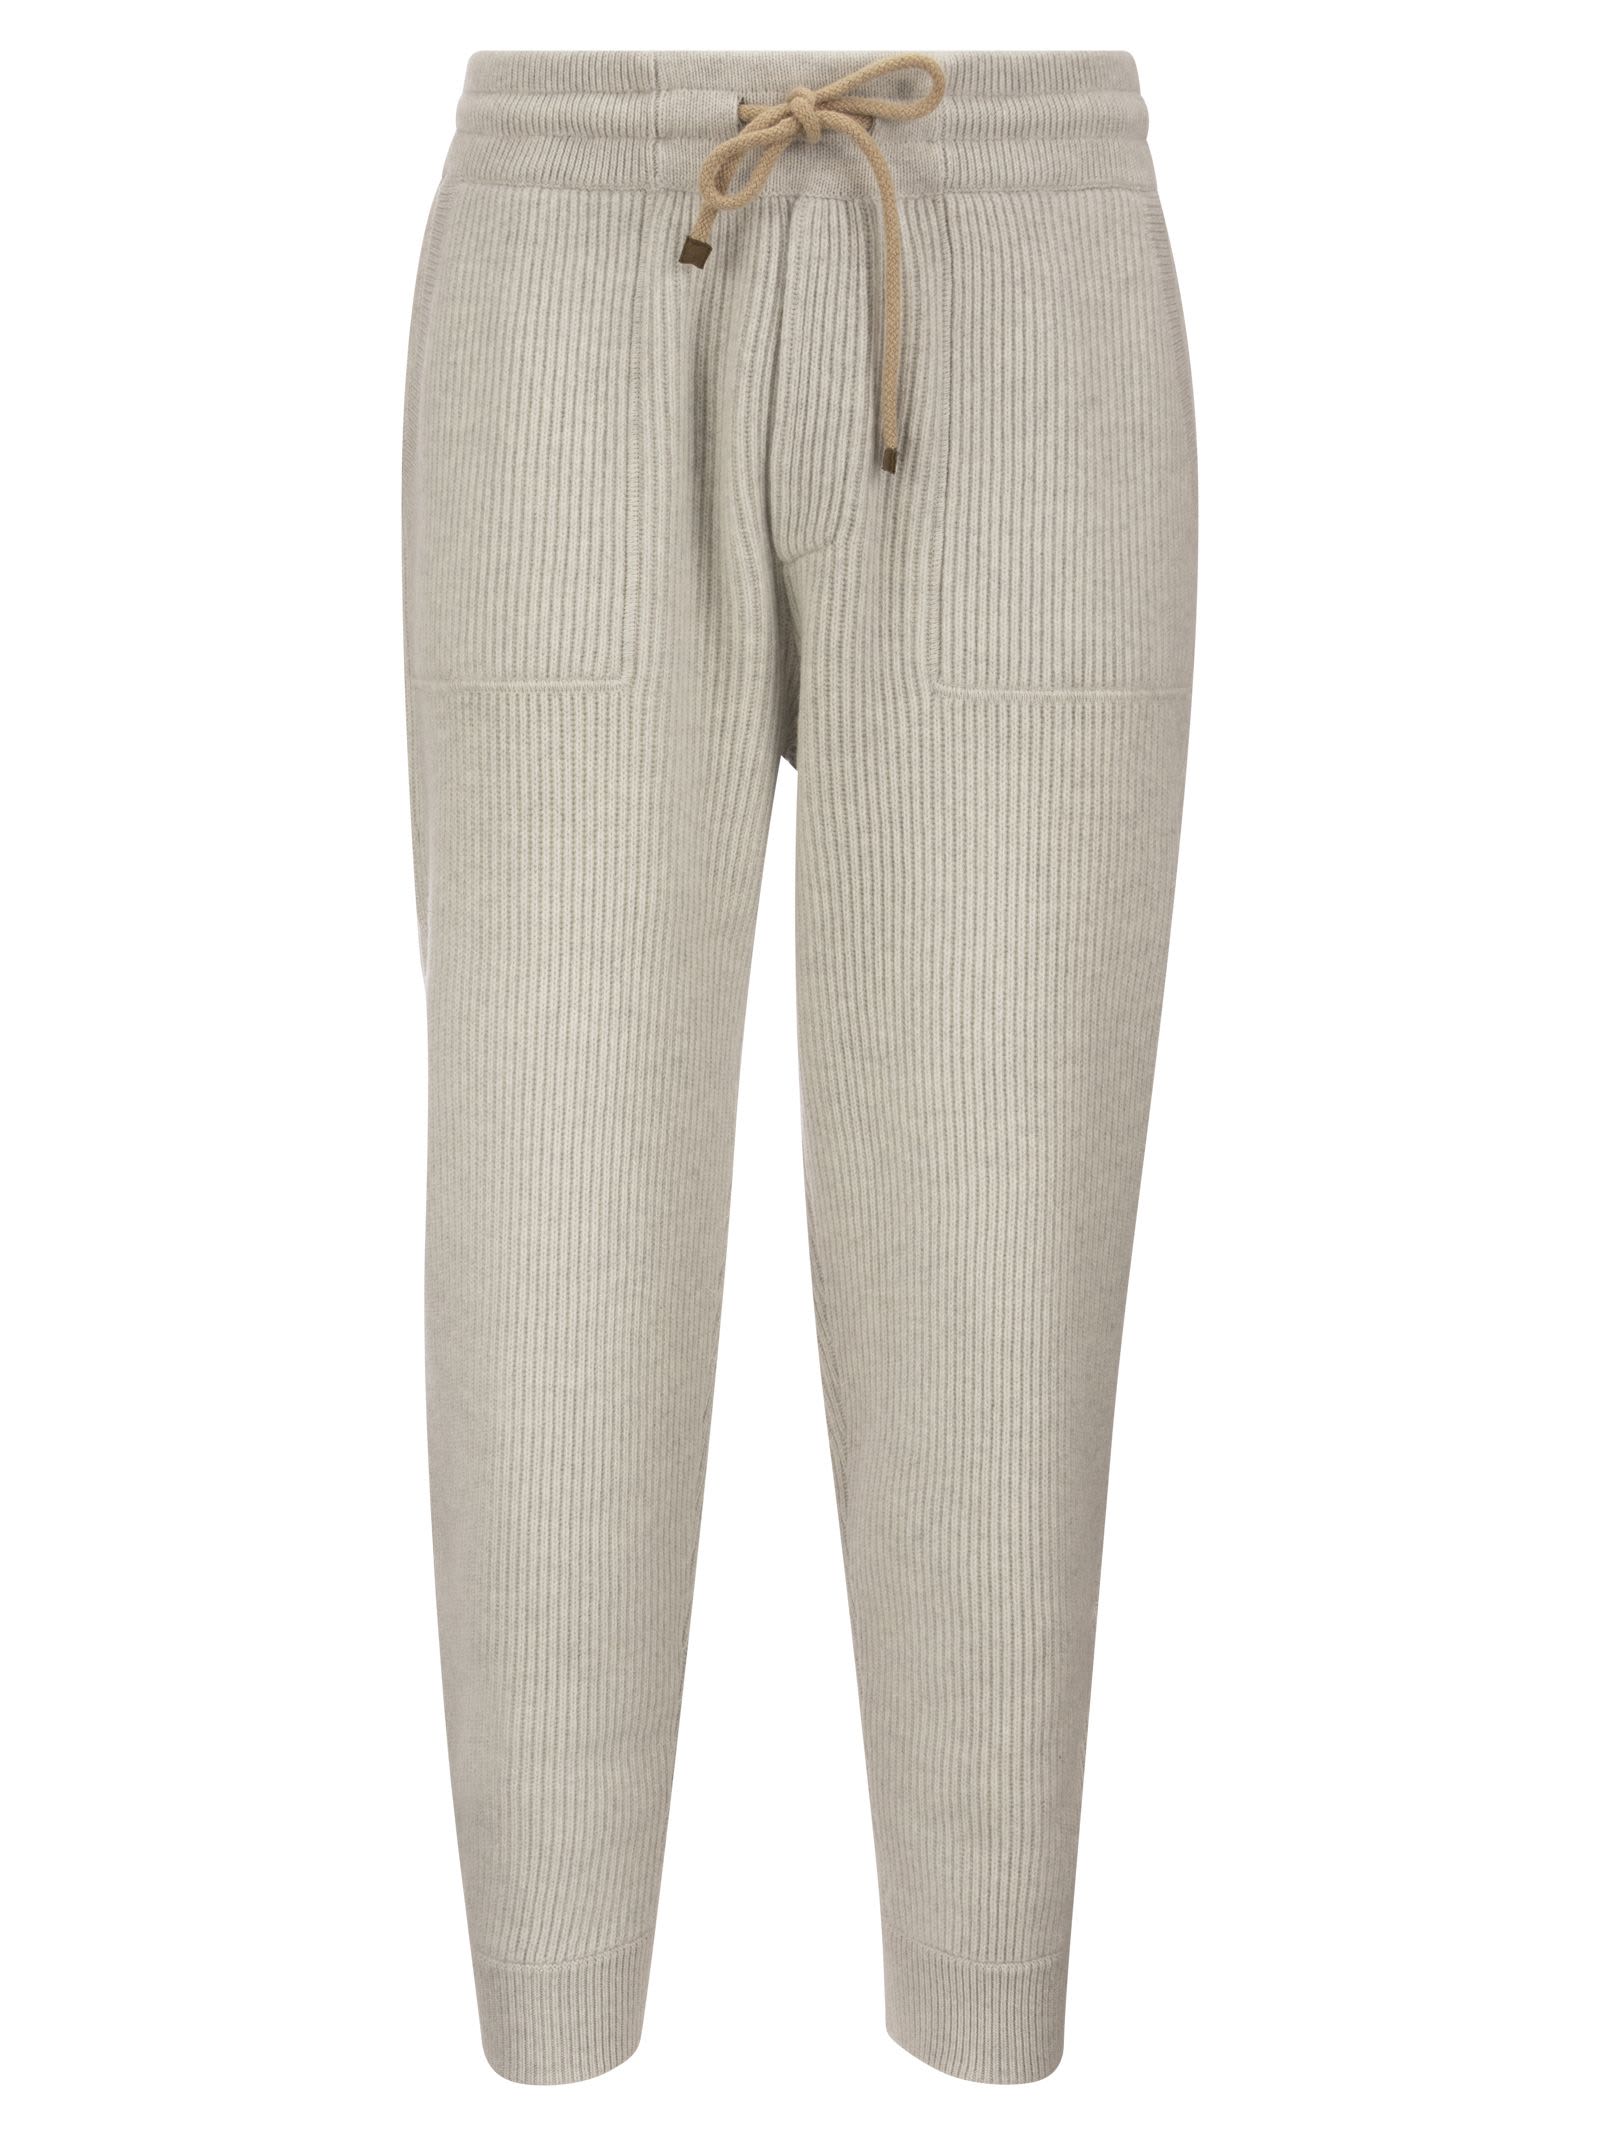 Brunello Cucinelli Cashmere Knit Joggers With Rib Knit And Bottom Zip